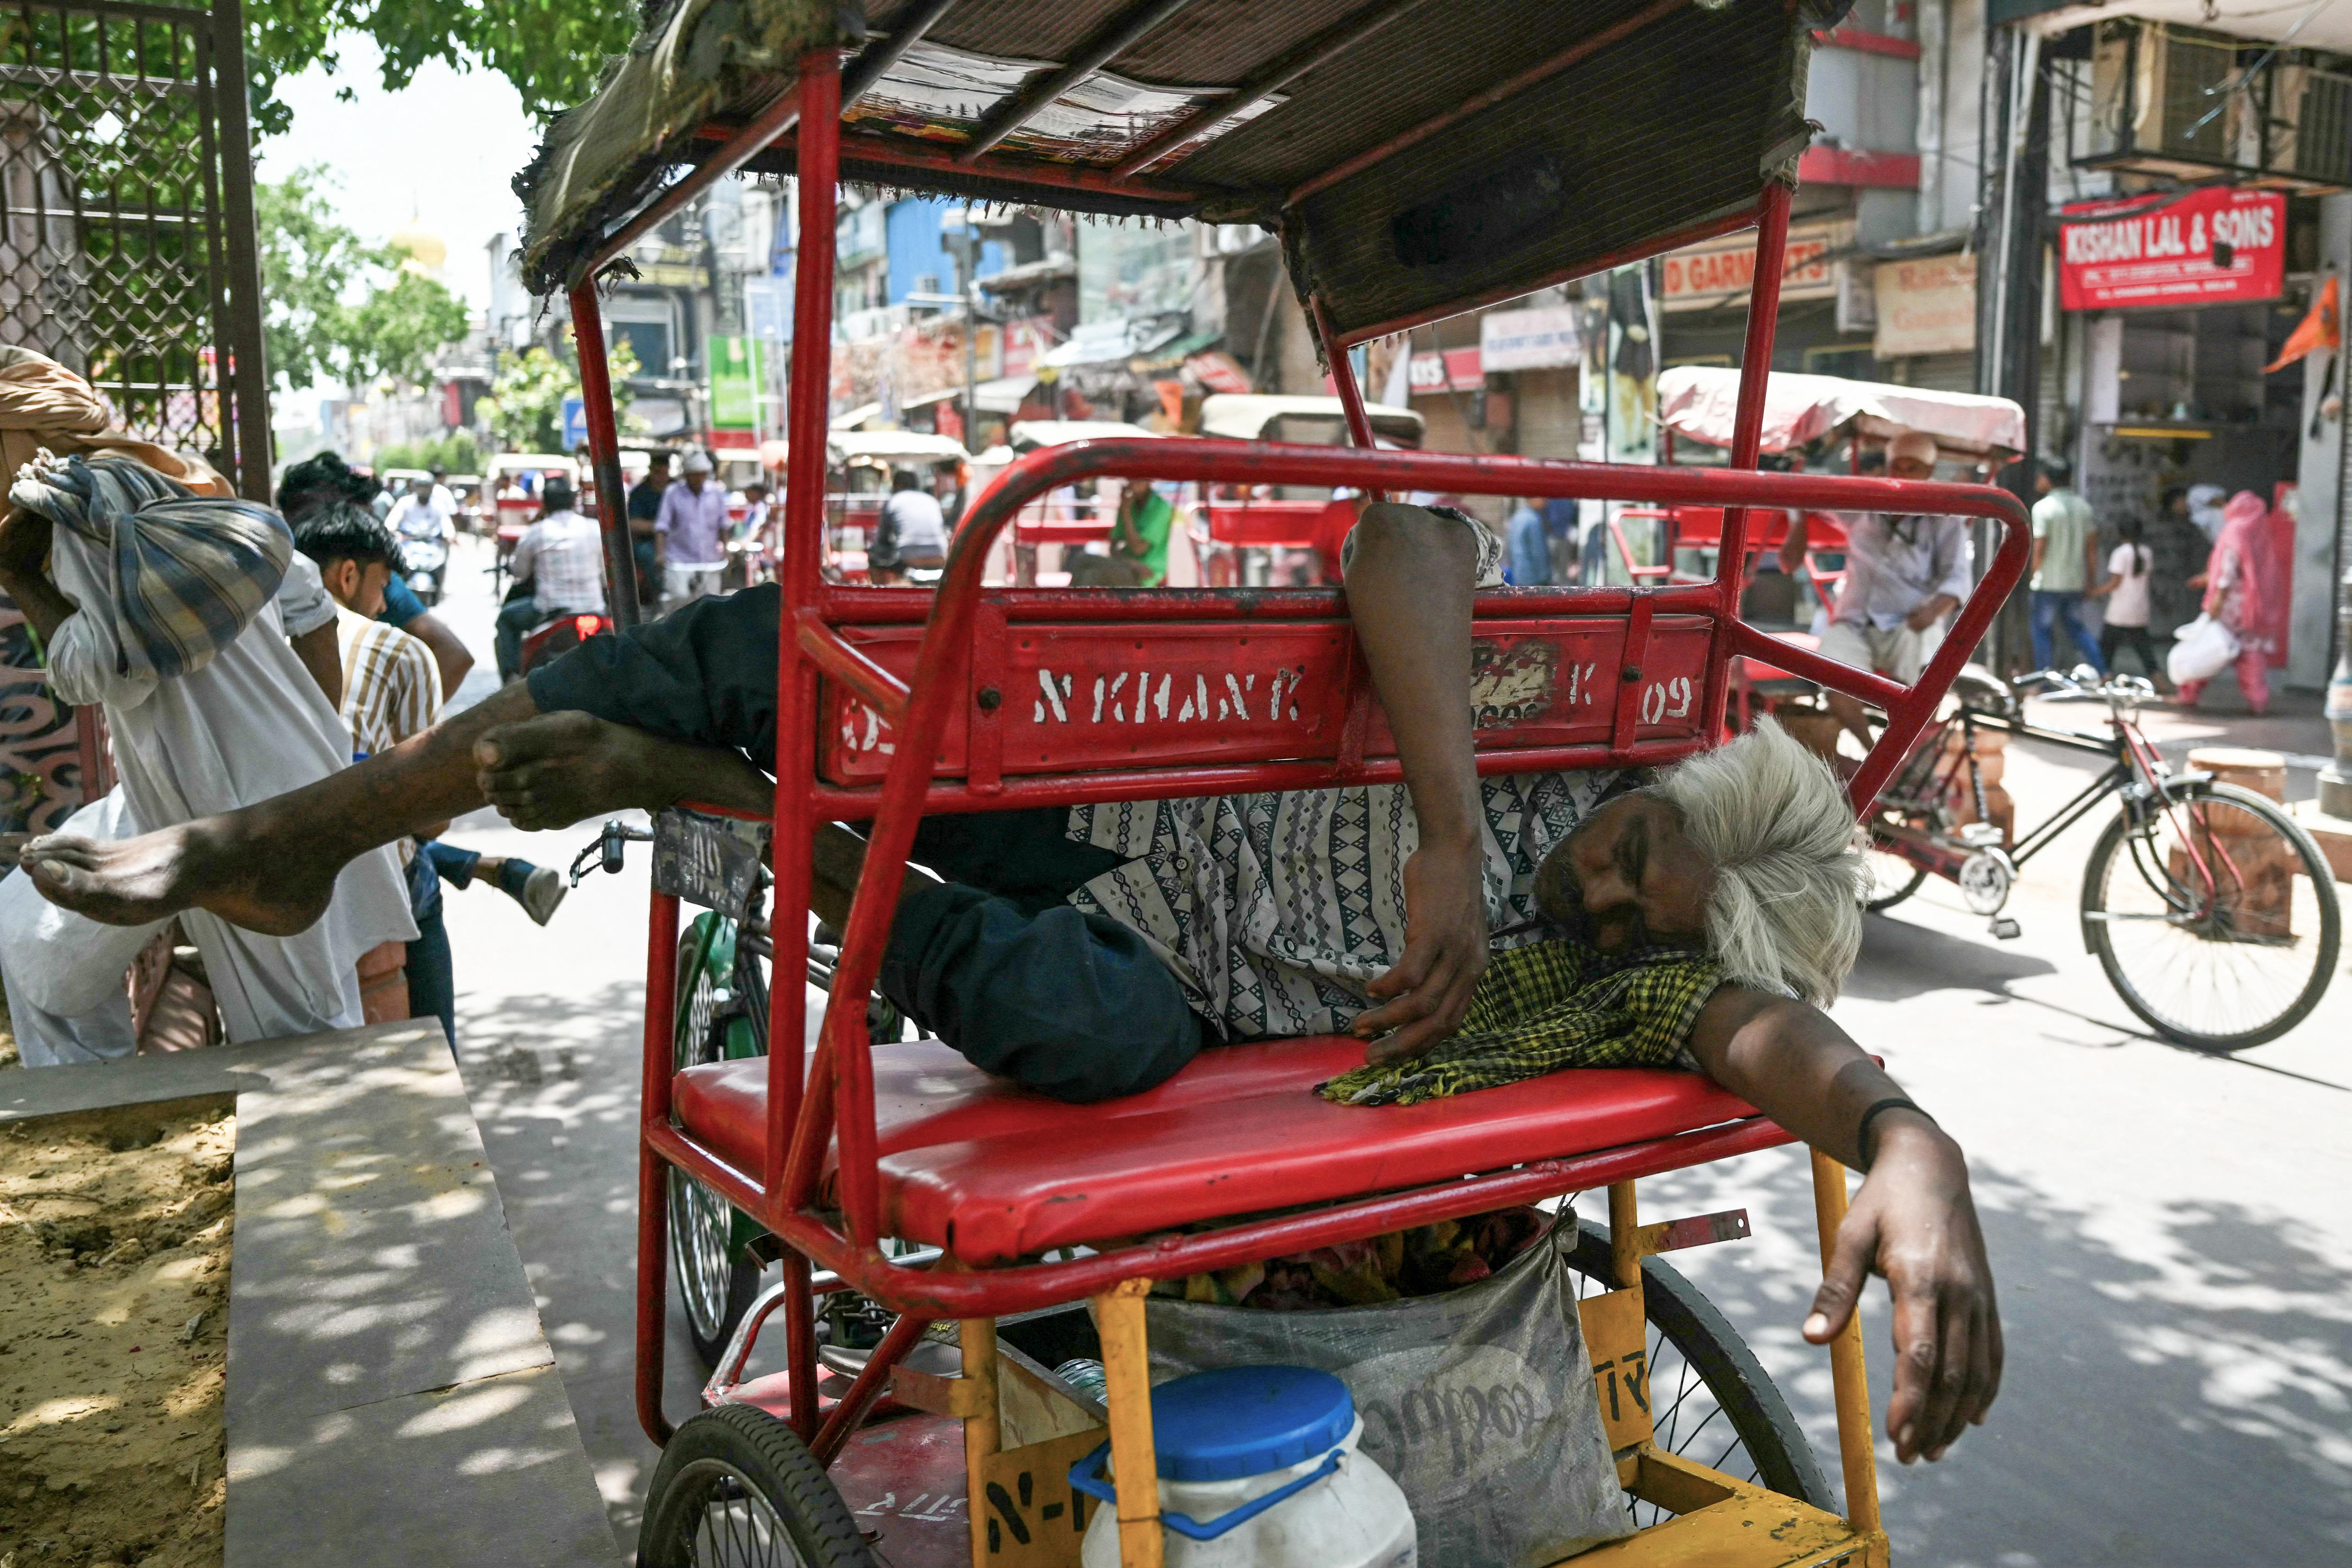 At least 50 people have died in a week as record heat scorches India